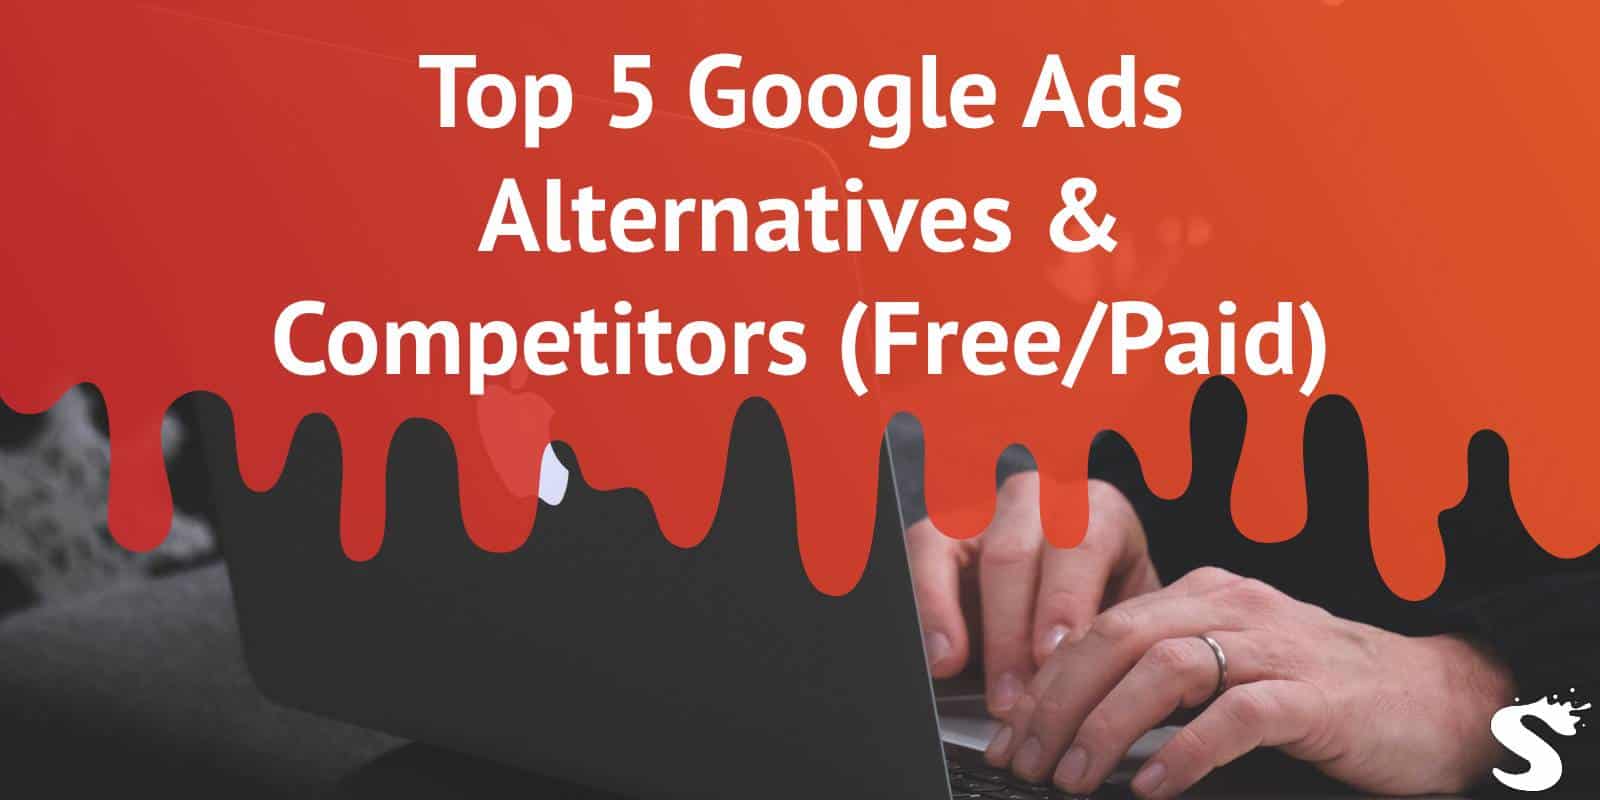 Top 5 Google Ads Alternatives & Competitors (Free/Paid)